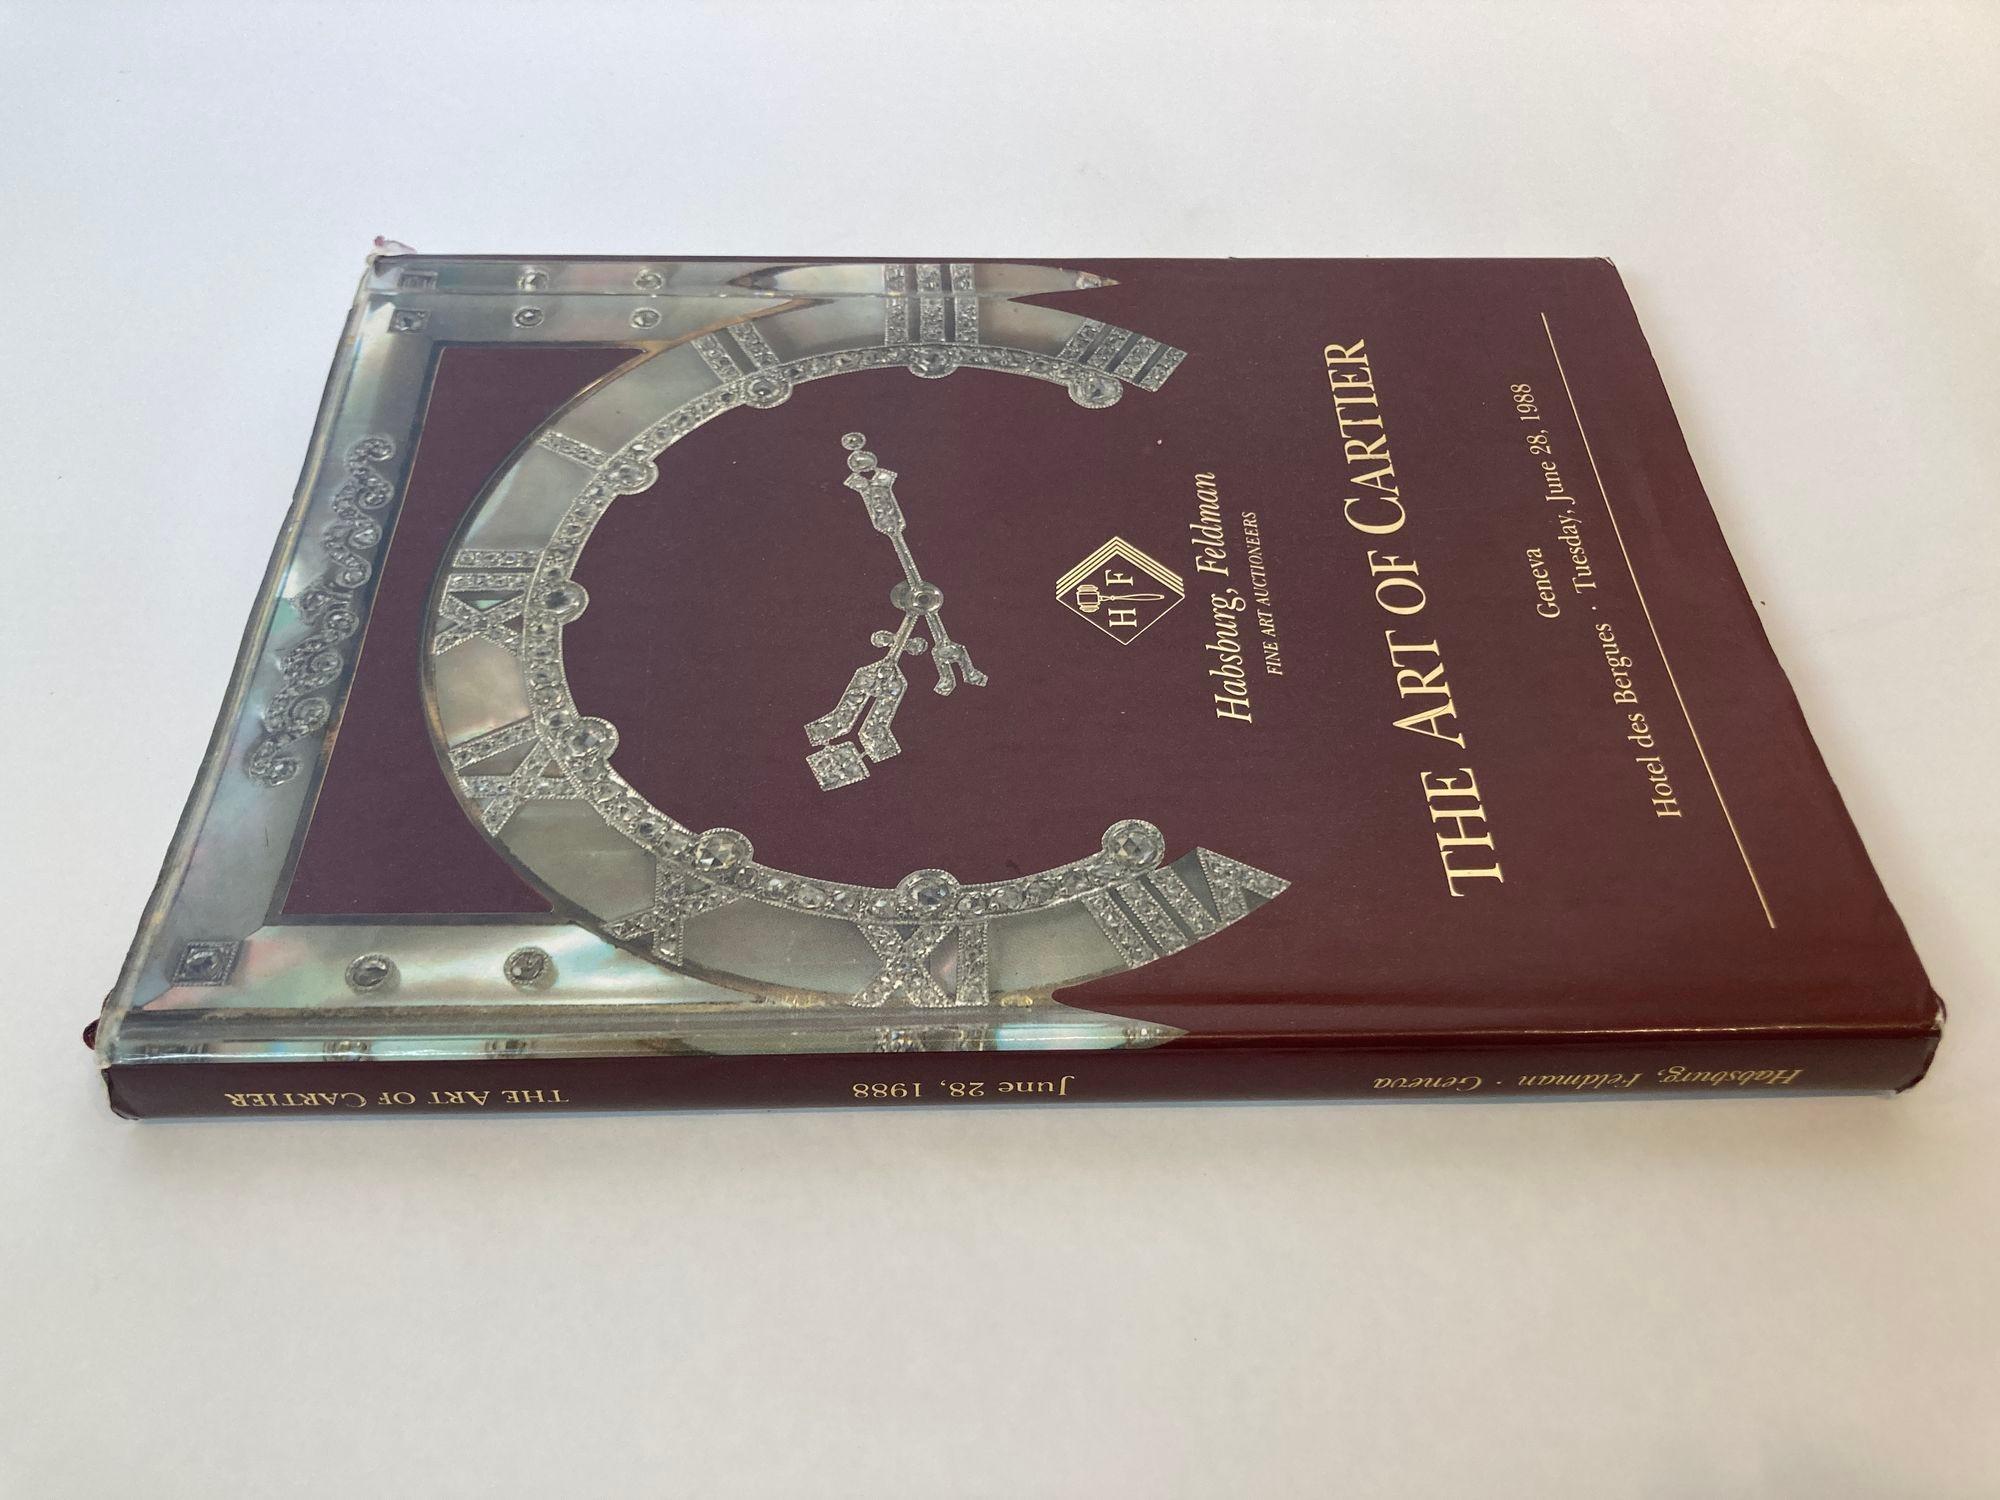 The Art of Cartier 1988 Geneva auction hardcover book catalog.
The Art of Cartier Habsburg Feldman auction hardcover.
135-page catalog June 28, 1988, 216 fabulous lots.
Hardcover with dustcover.
Dimensions: 11 in x 8 in.
Cartier was founded in